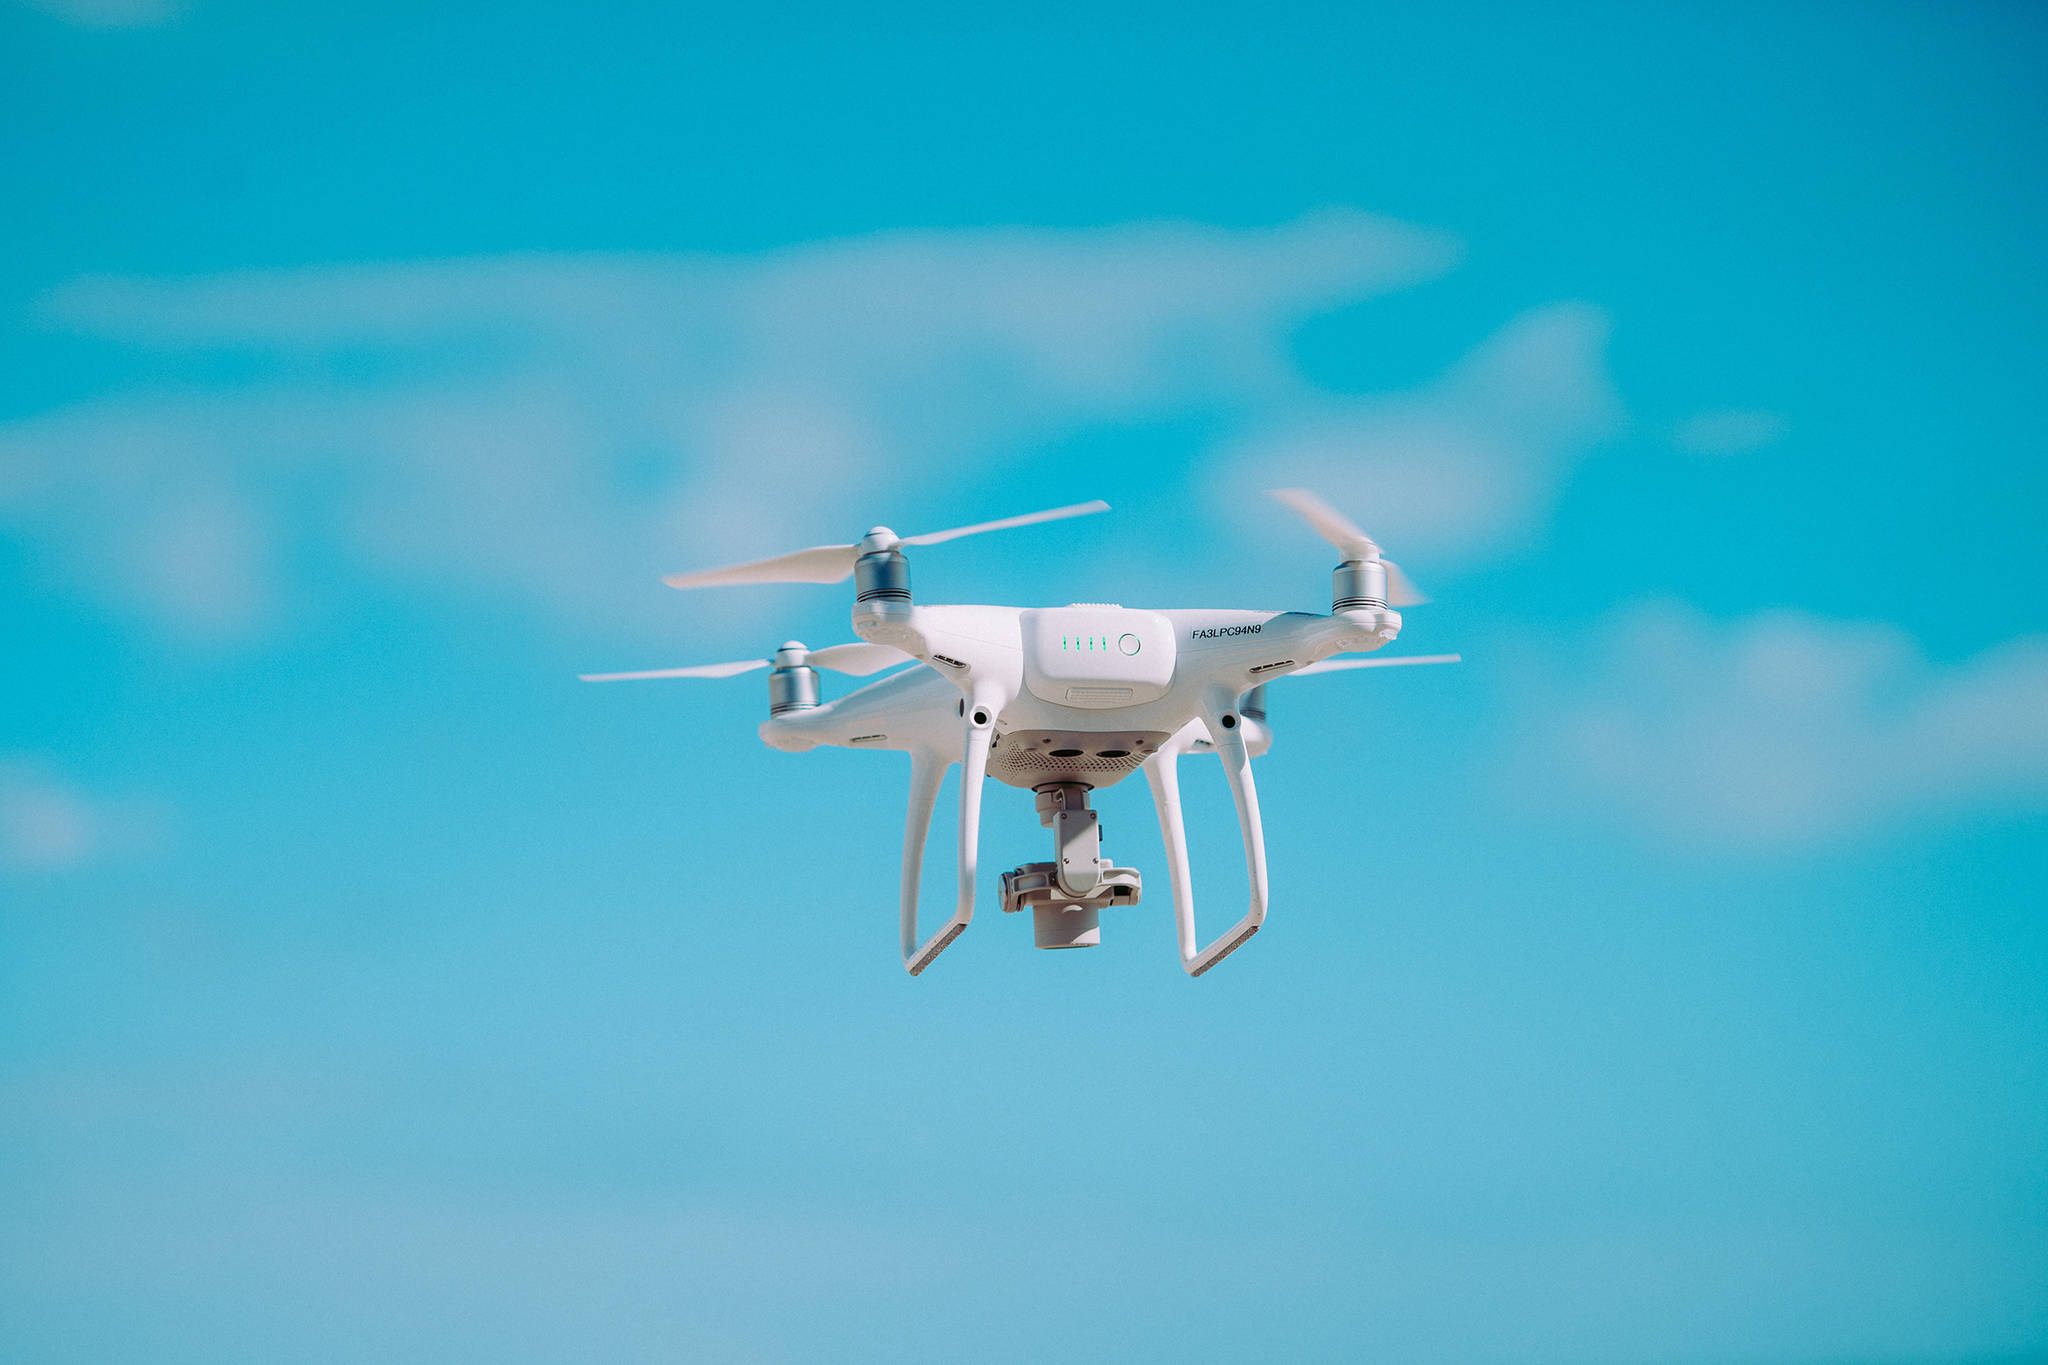 Drones’ ability to take photos and video makes them useful for a variety of industries, said Dan Hubert of Last Frontier Aerial. (Unsplash | Annie Spratt)